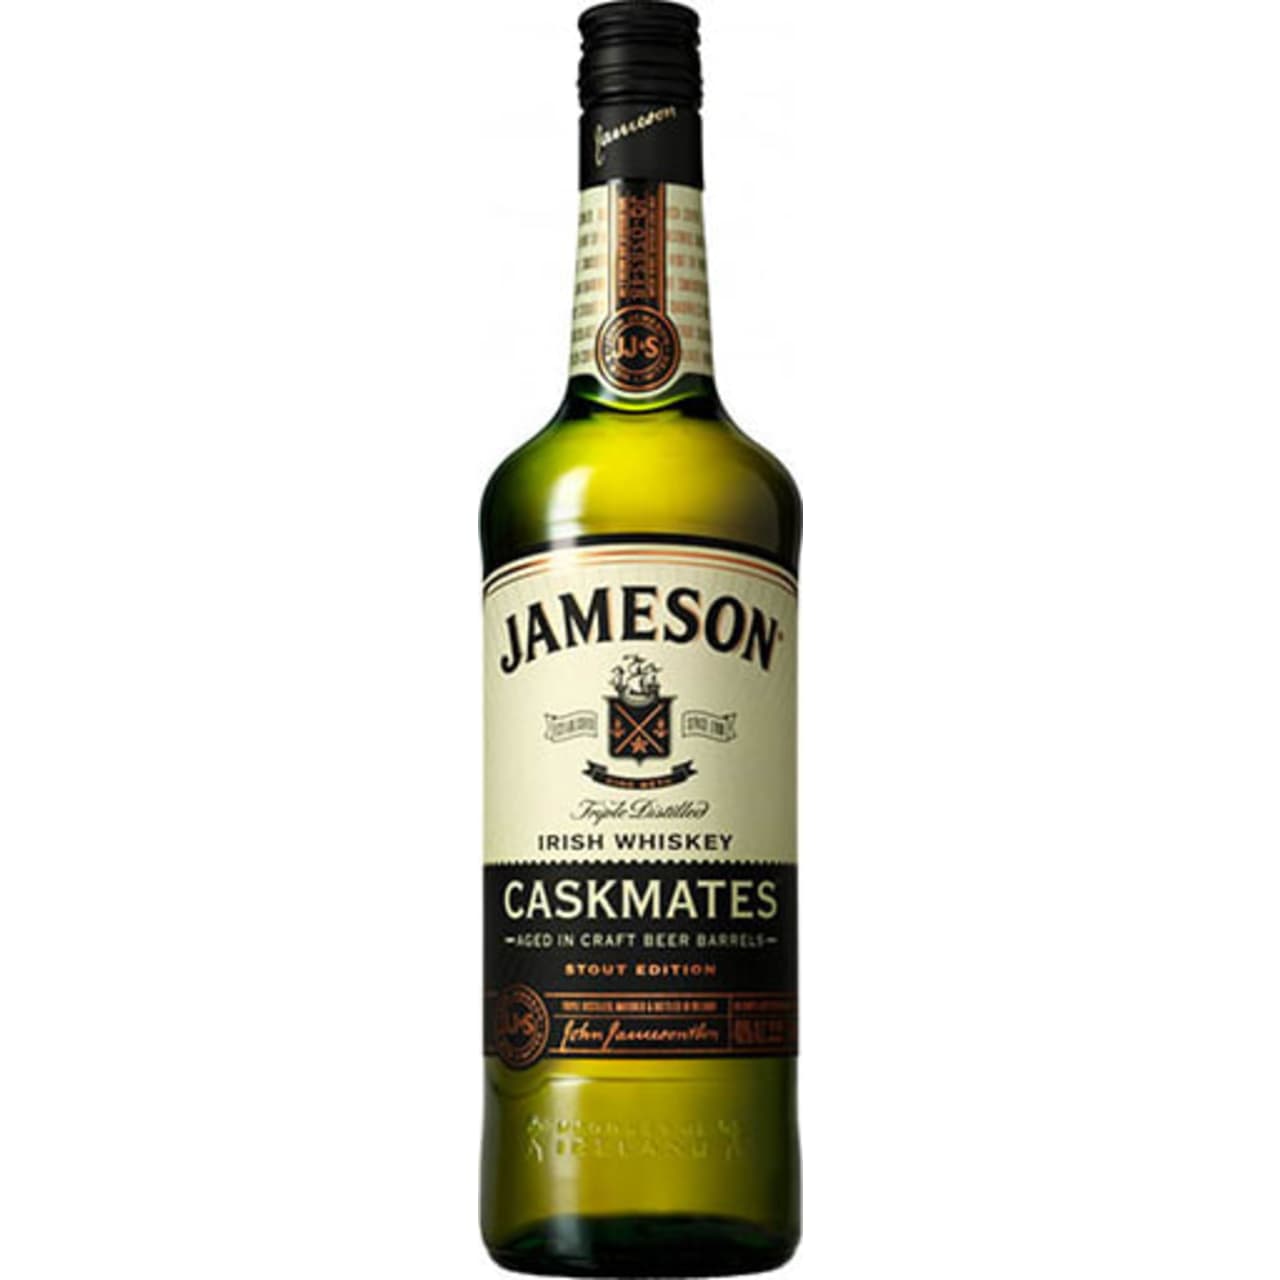 Jameson Caskmates sees the reuse of old whiskey barrels. Nothing new in that, but in between, they've been used to age stout from Cork's Franciscan Well brewery. The same smooth triple distilled Jameson with added notes of cocoa, coffee and butterscotch.